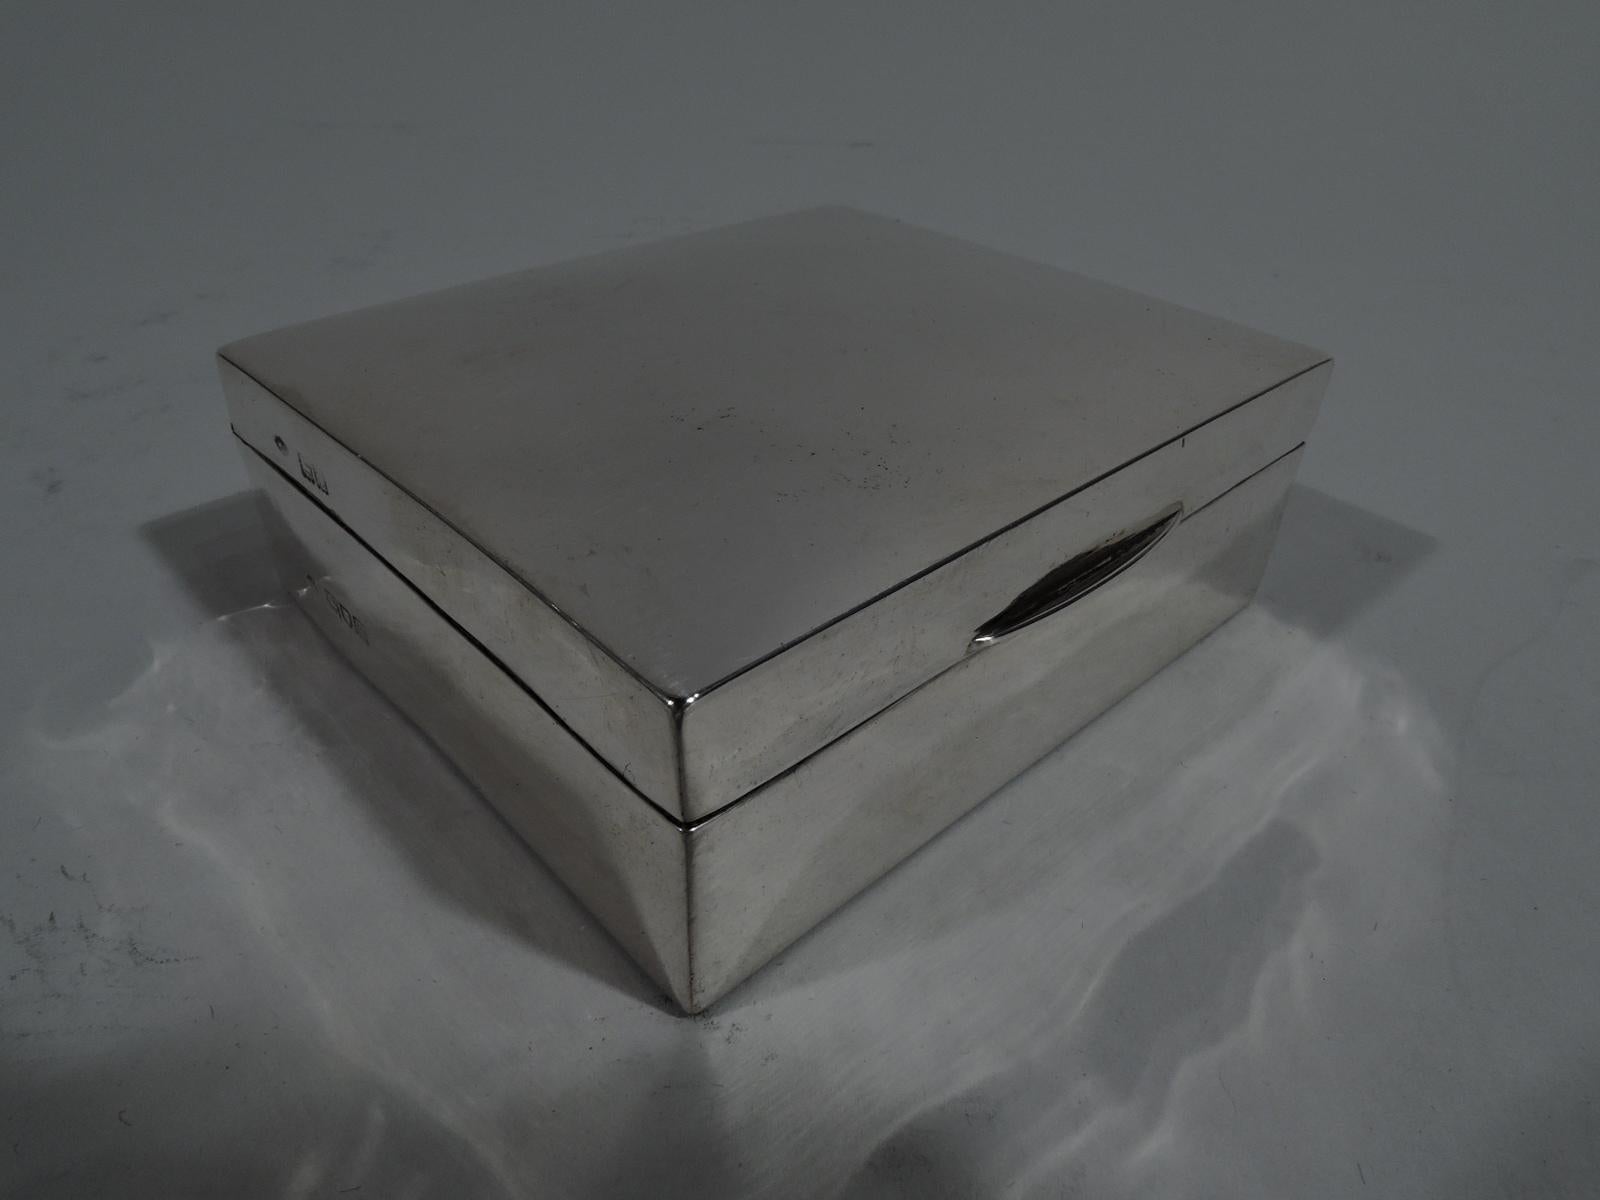 Edwardian sterling silver trinket box. Made by William Comyns in London in 1907. Rectangular with straight sides. Cover hinged, tabbed, and gently curved. Box and cover interior cedar lined. Box underside leather lined. Fully marked. Gross weight: 4